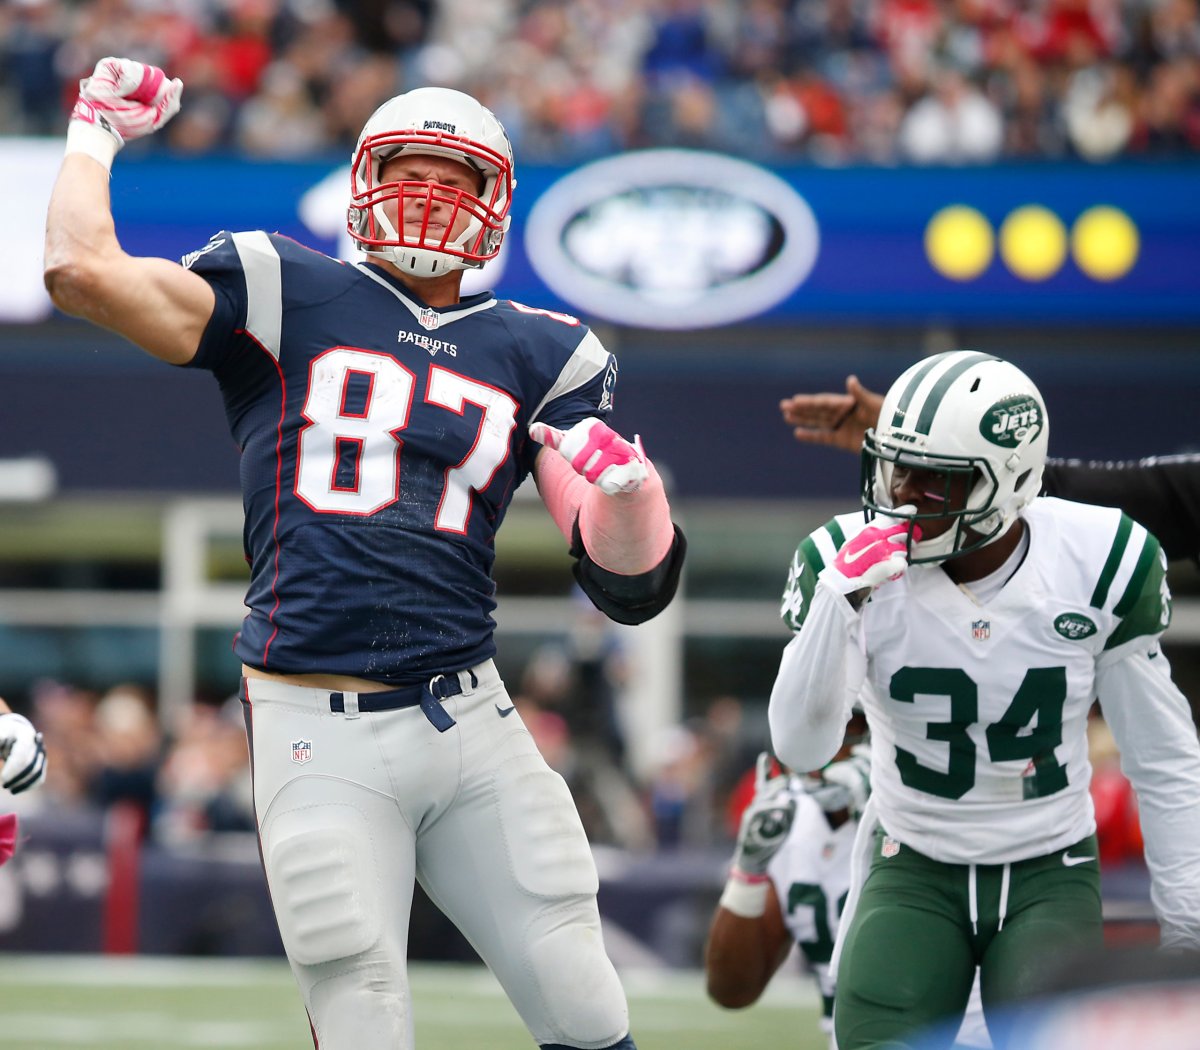 Madden 17 player rankings: Rob Gronkowski only offensive player ranked 99